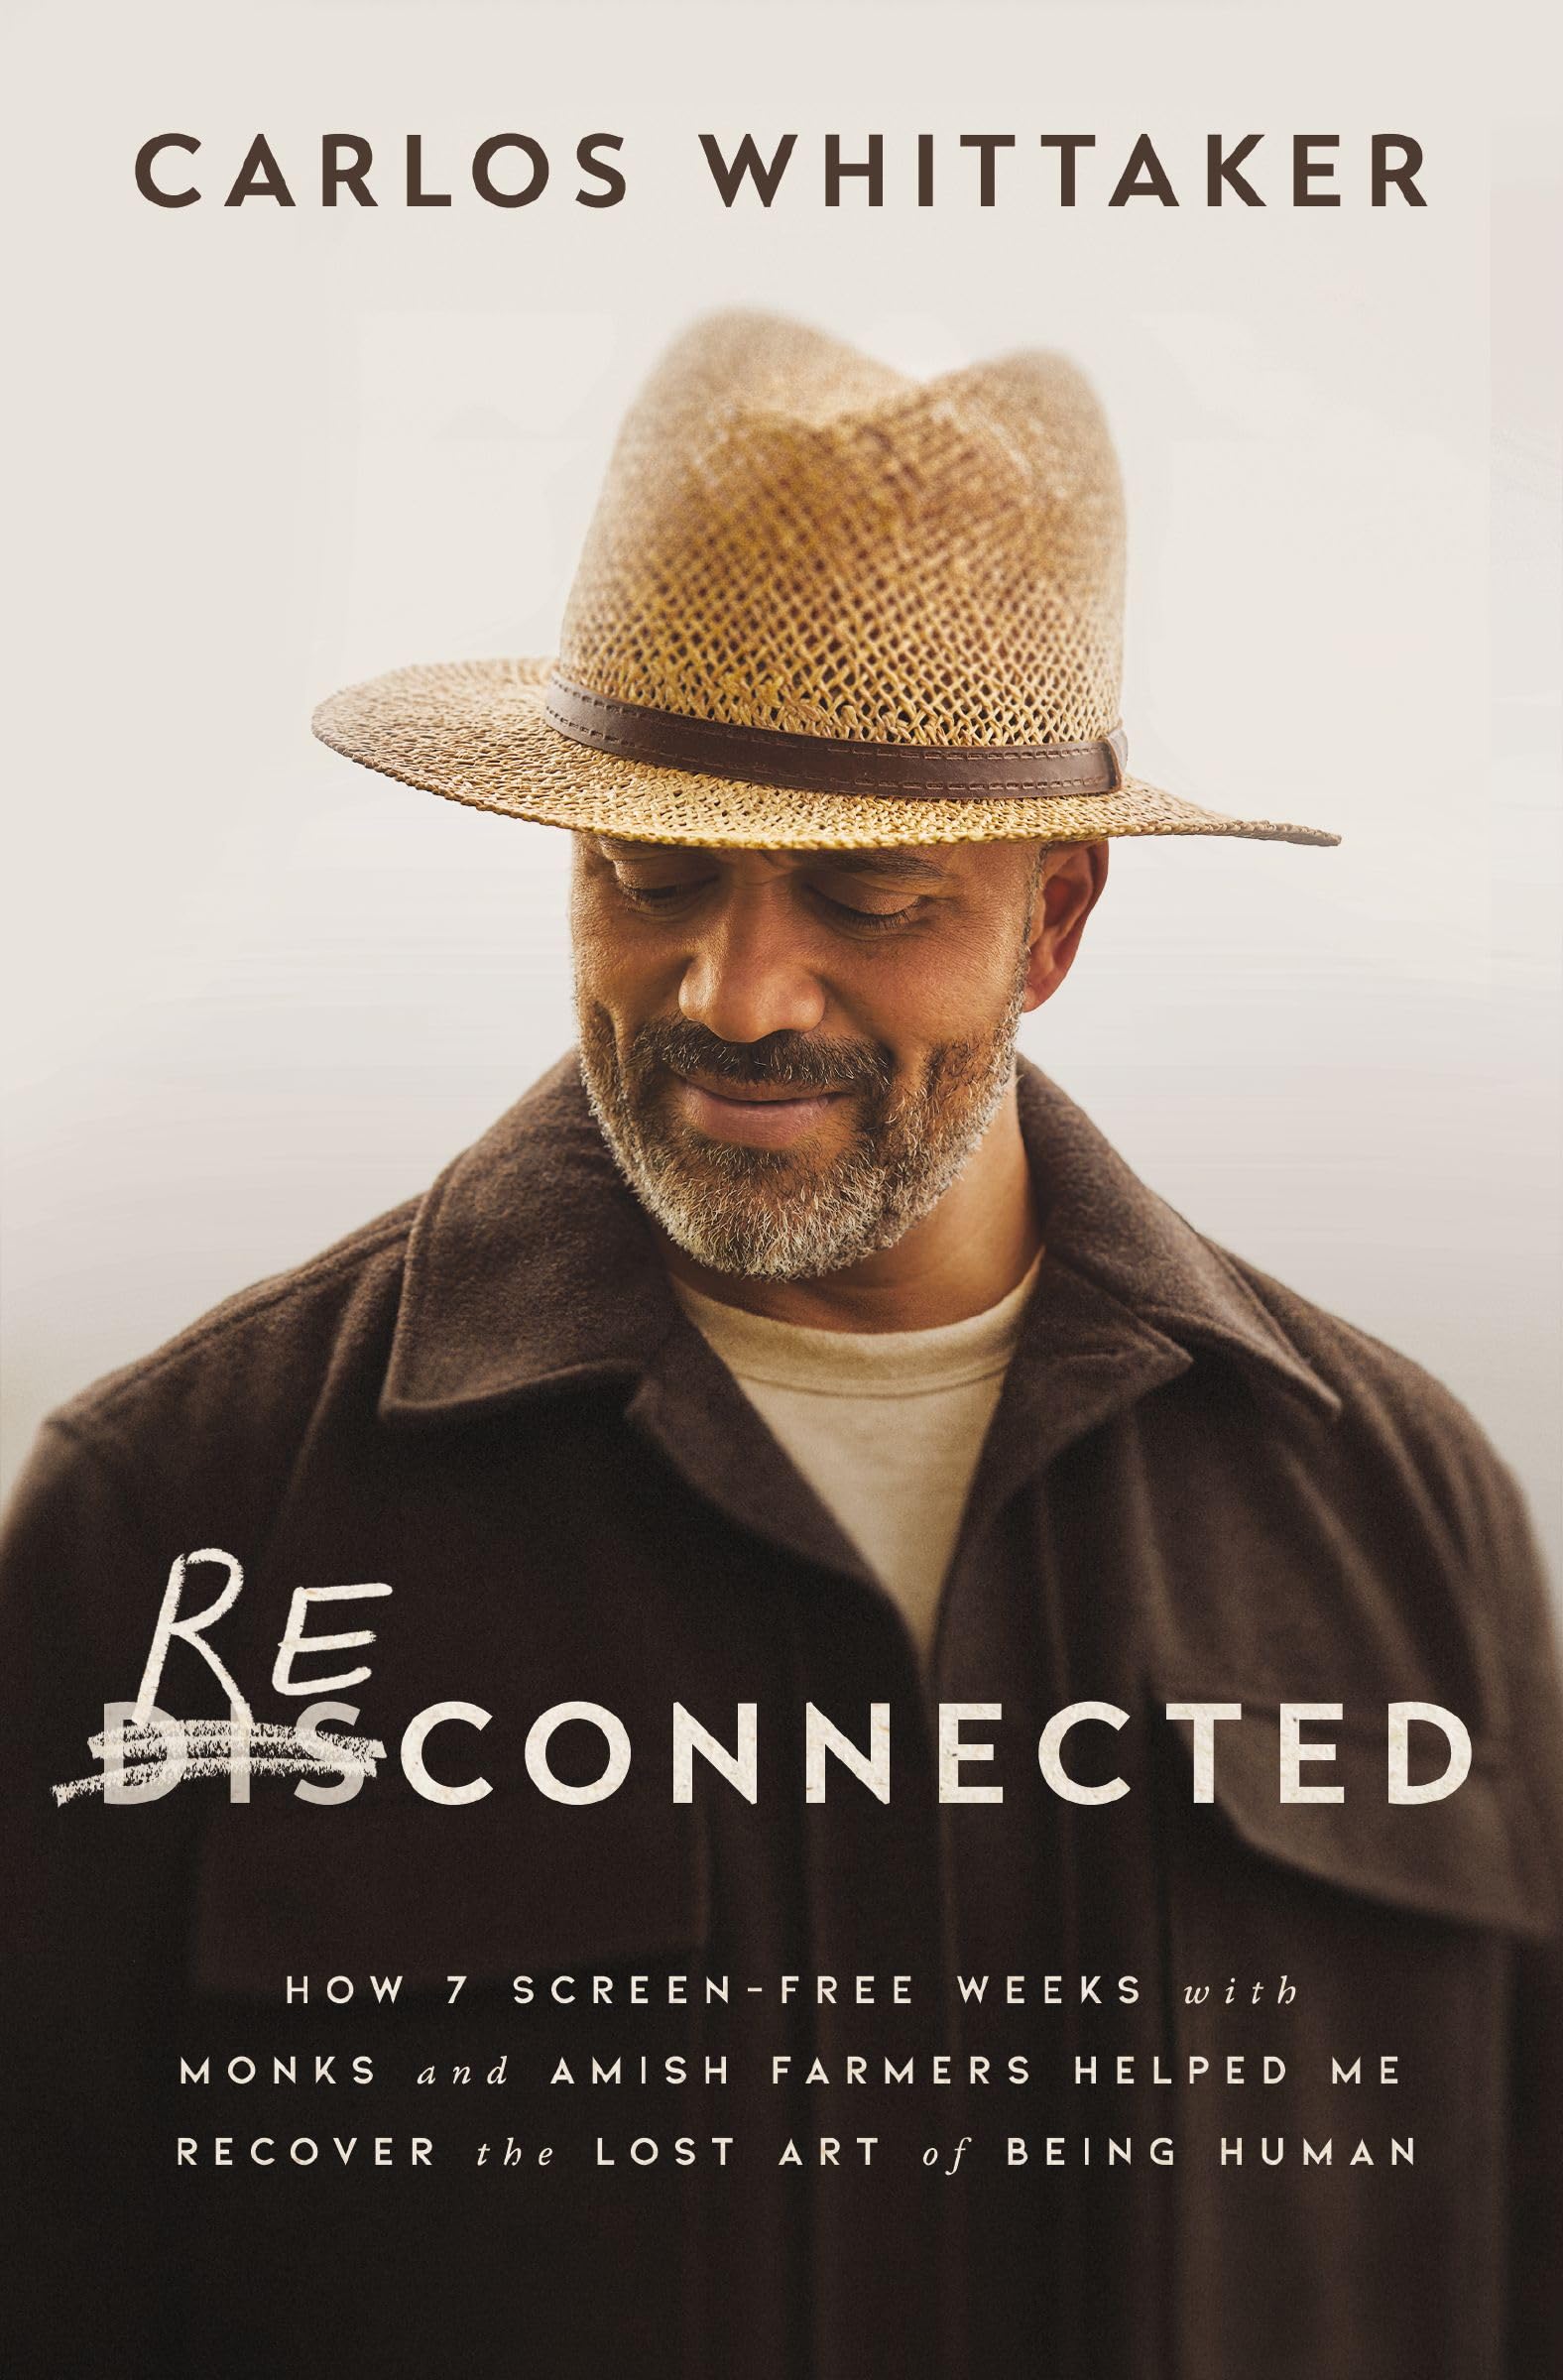 Reconnected: How 7 Screen-Free Weeks with Monks and Amish Farmers Helped Me Recover the Lost Art of Being Human by Whittaker, Carlos